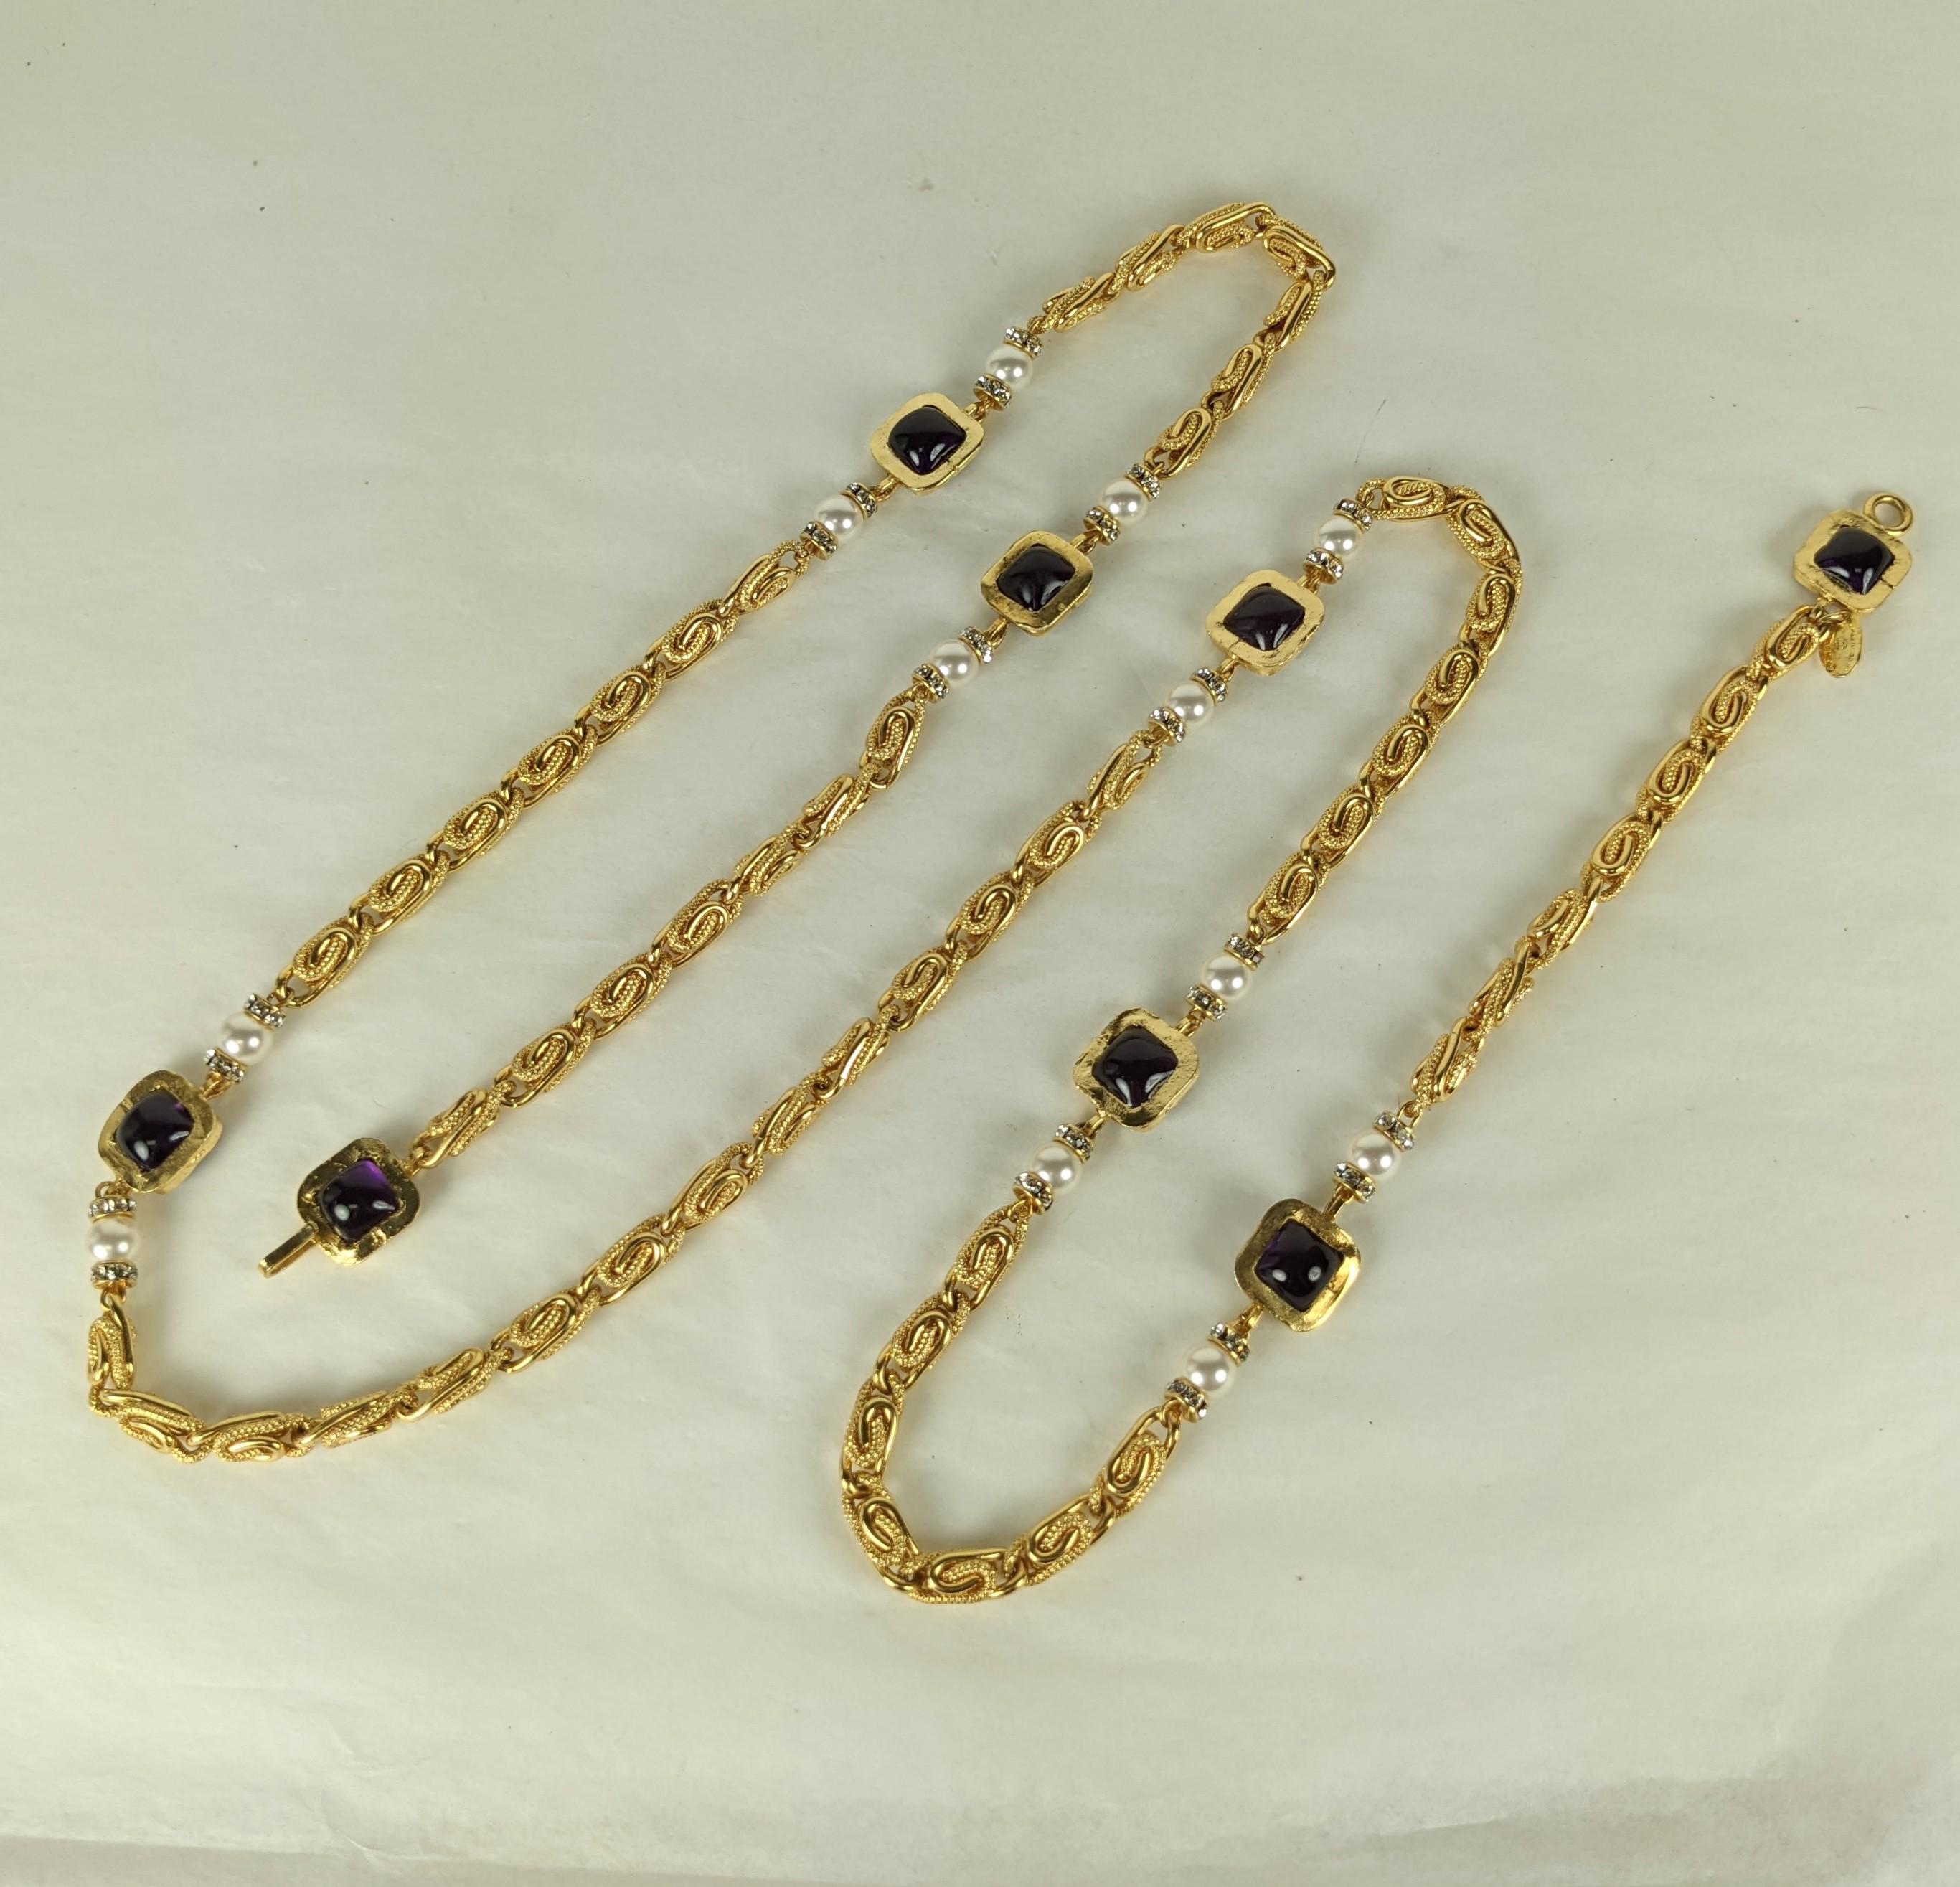 Maison Gripoix for Chanel poured glass amythest, faux pearl and pave long chain. Byzantine necklace composed of square stations of amythest poured glass enamel, faux pearl and crystal rondelle stations with greek key link chaining. 
Excellent